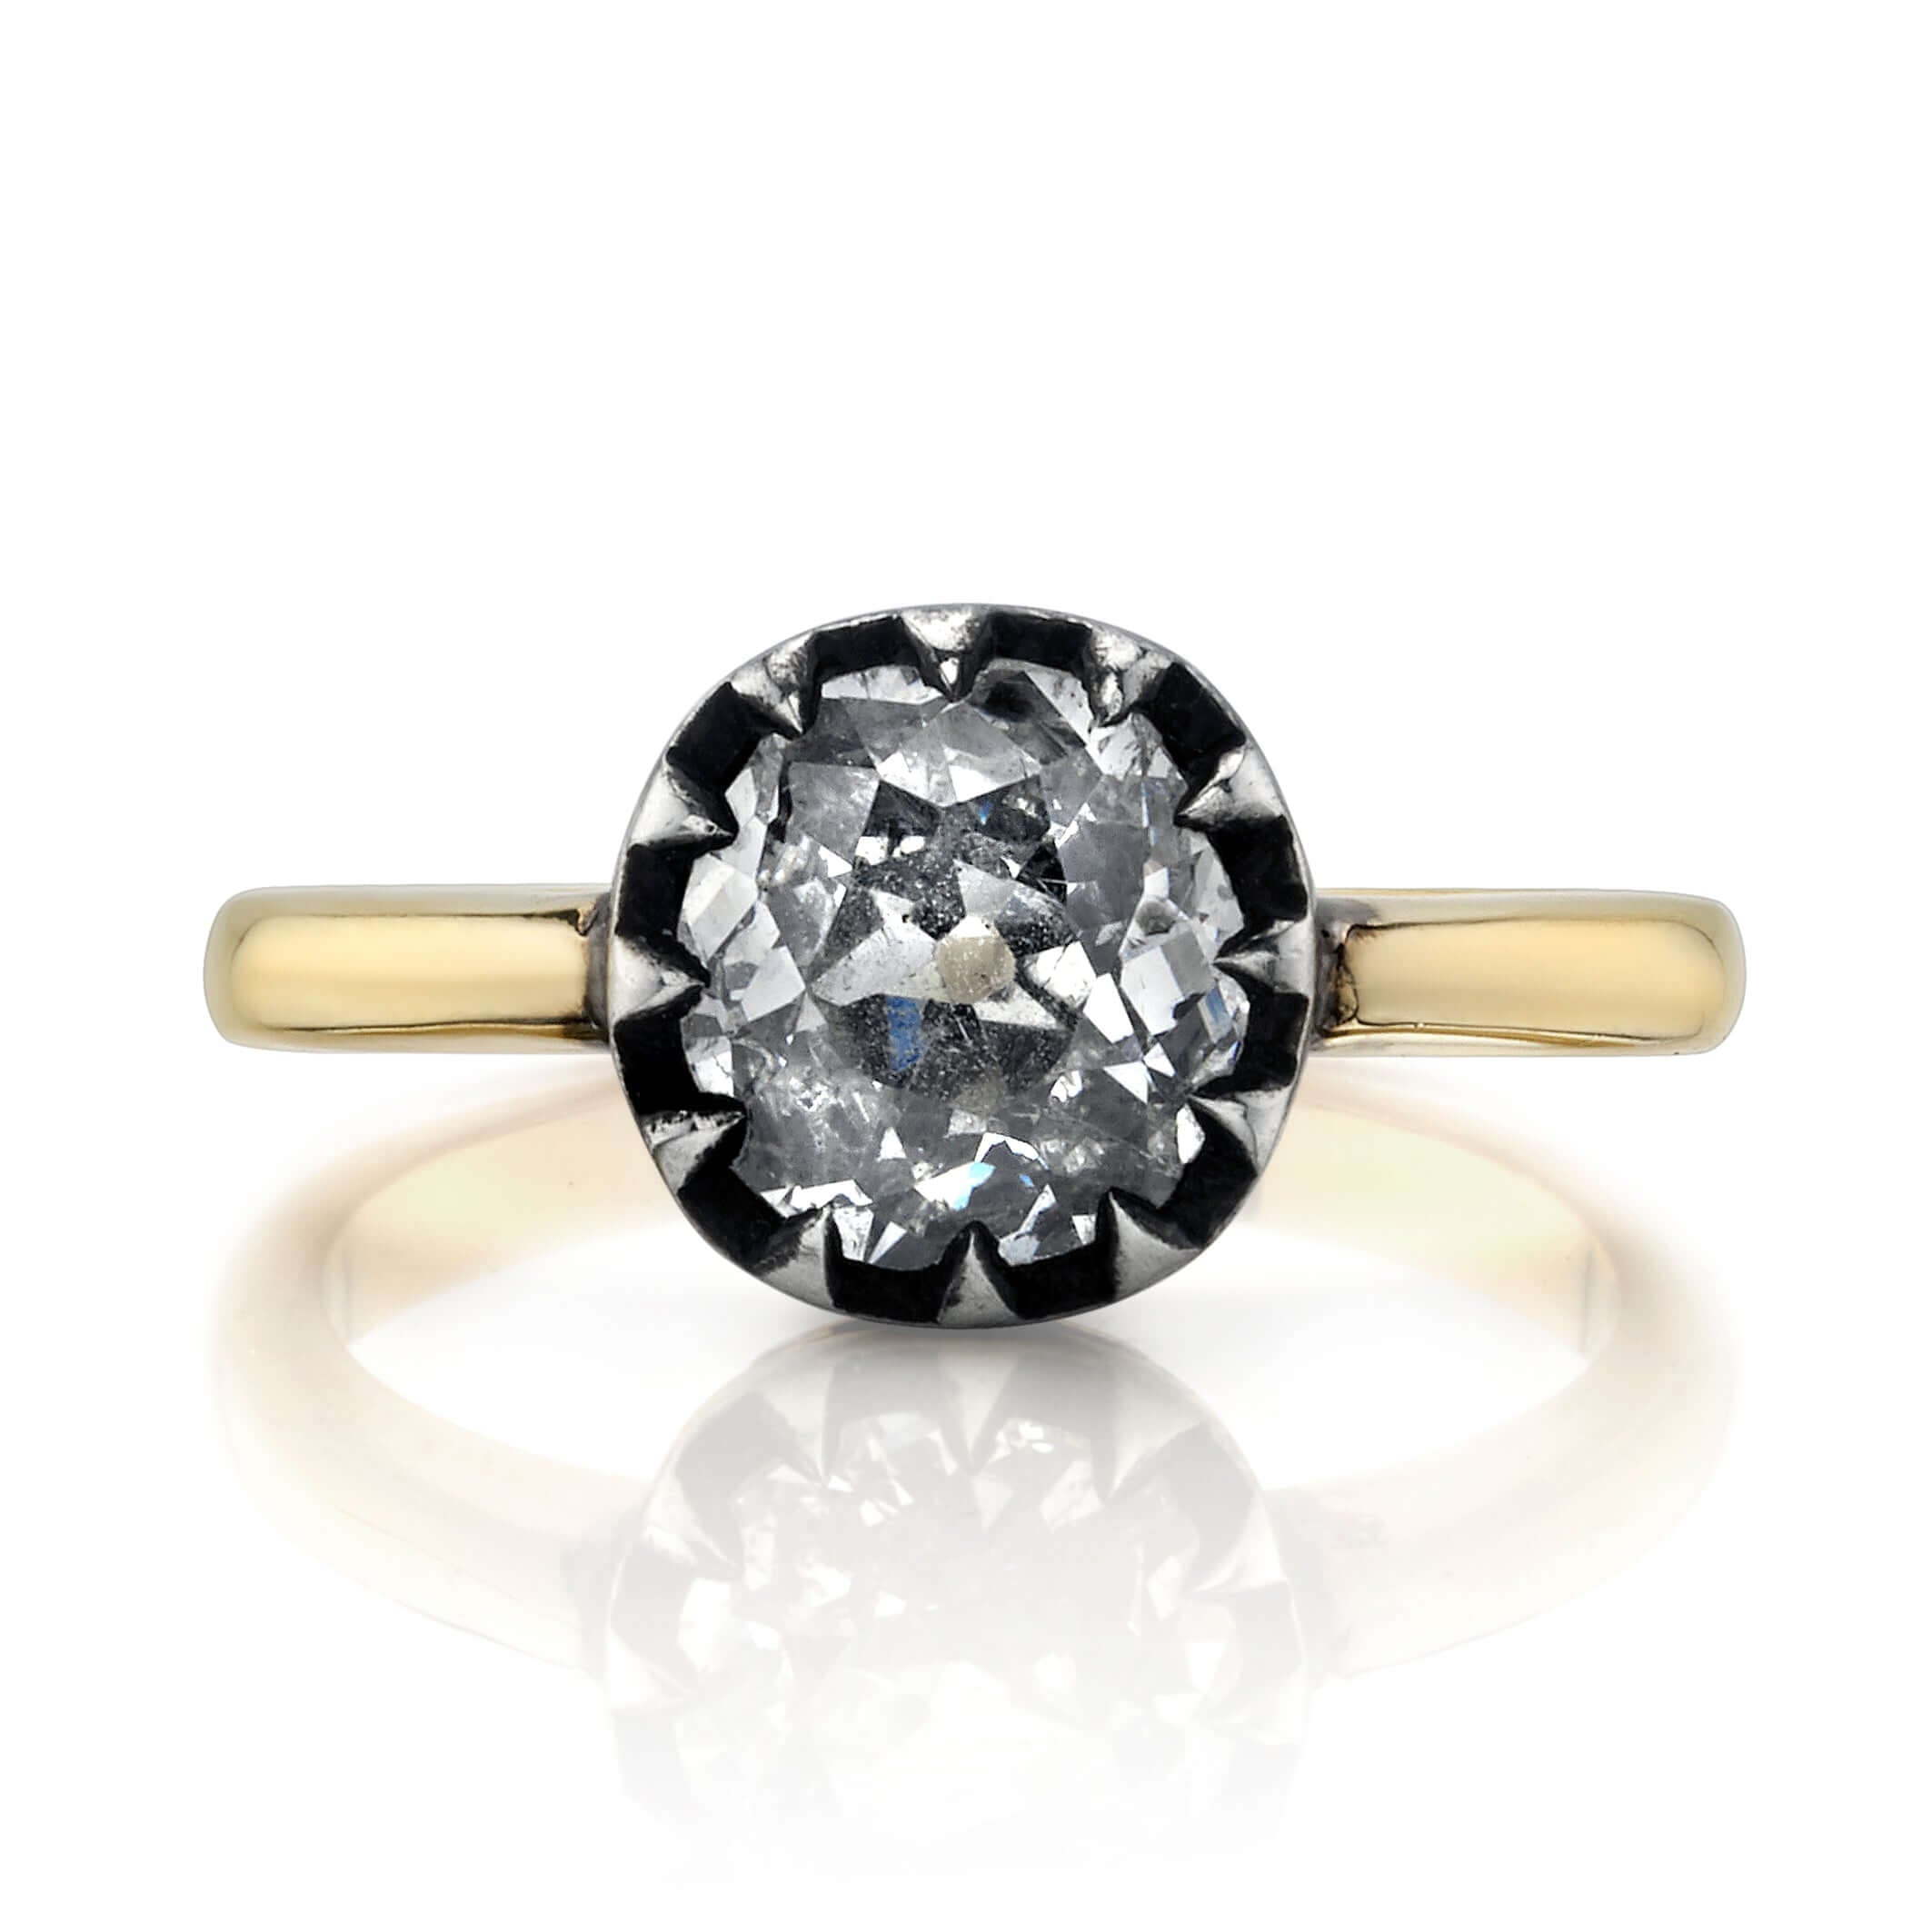 SINGLE STONE ANGELINA RING featuring 1.35ct H/SI2 EGL certified antique old mine cut diamond set in a handcrafted 18K yellow gold and oxidized silver mounting.